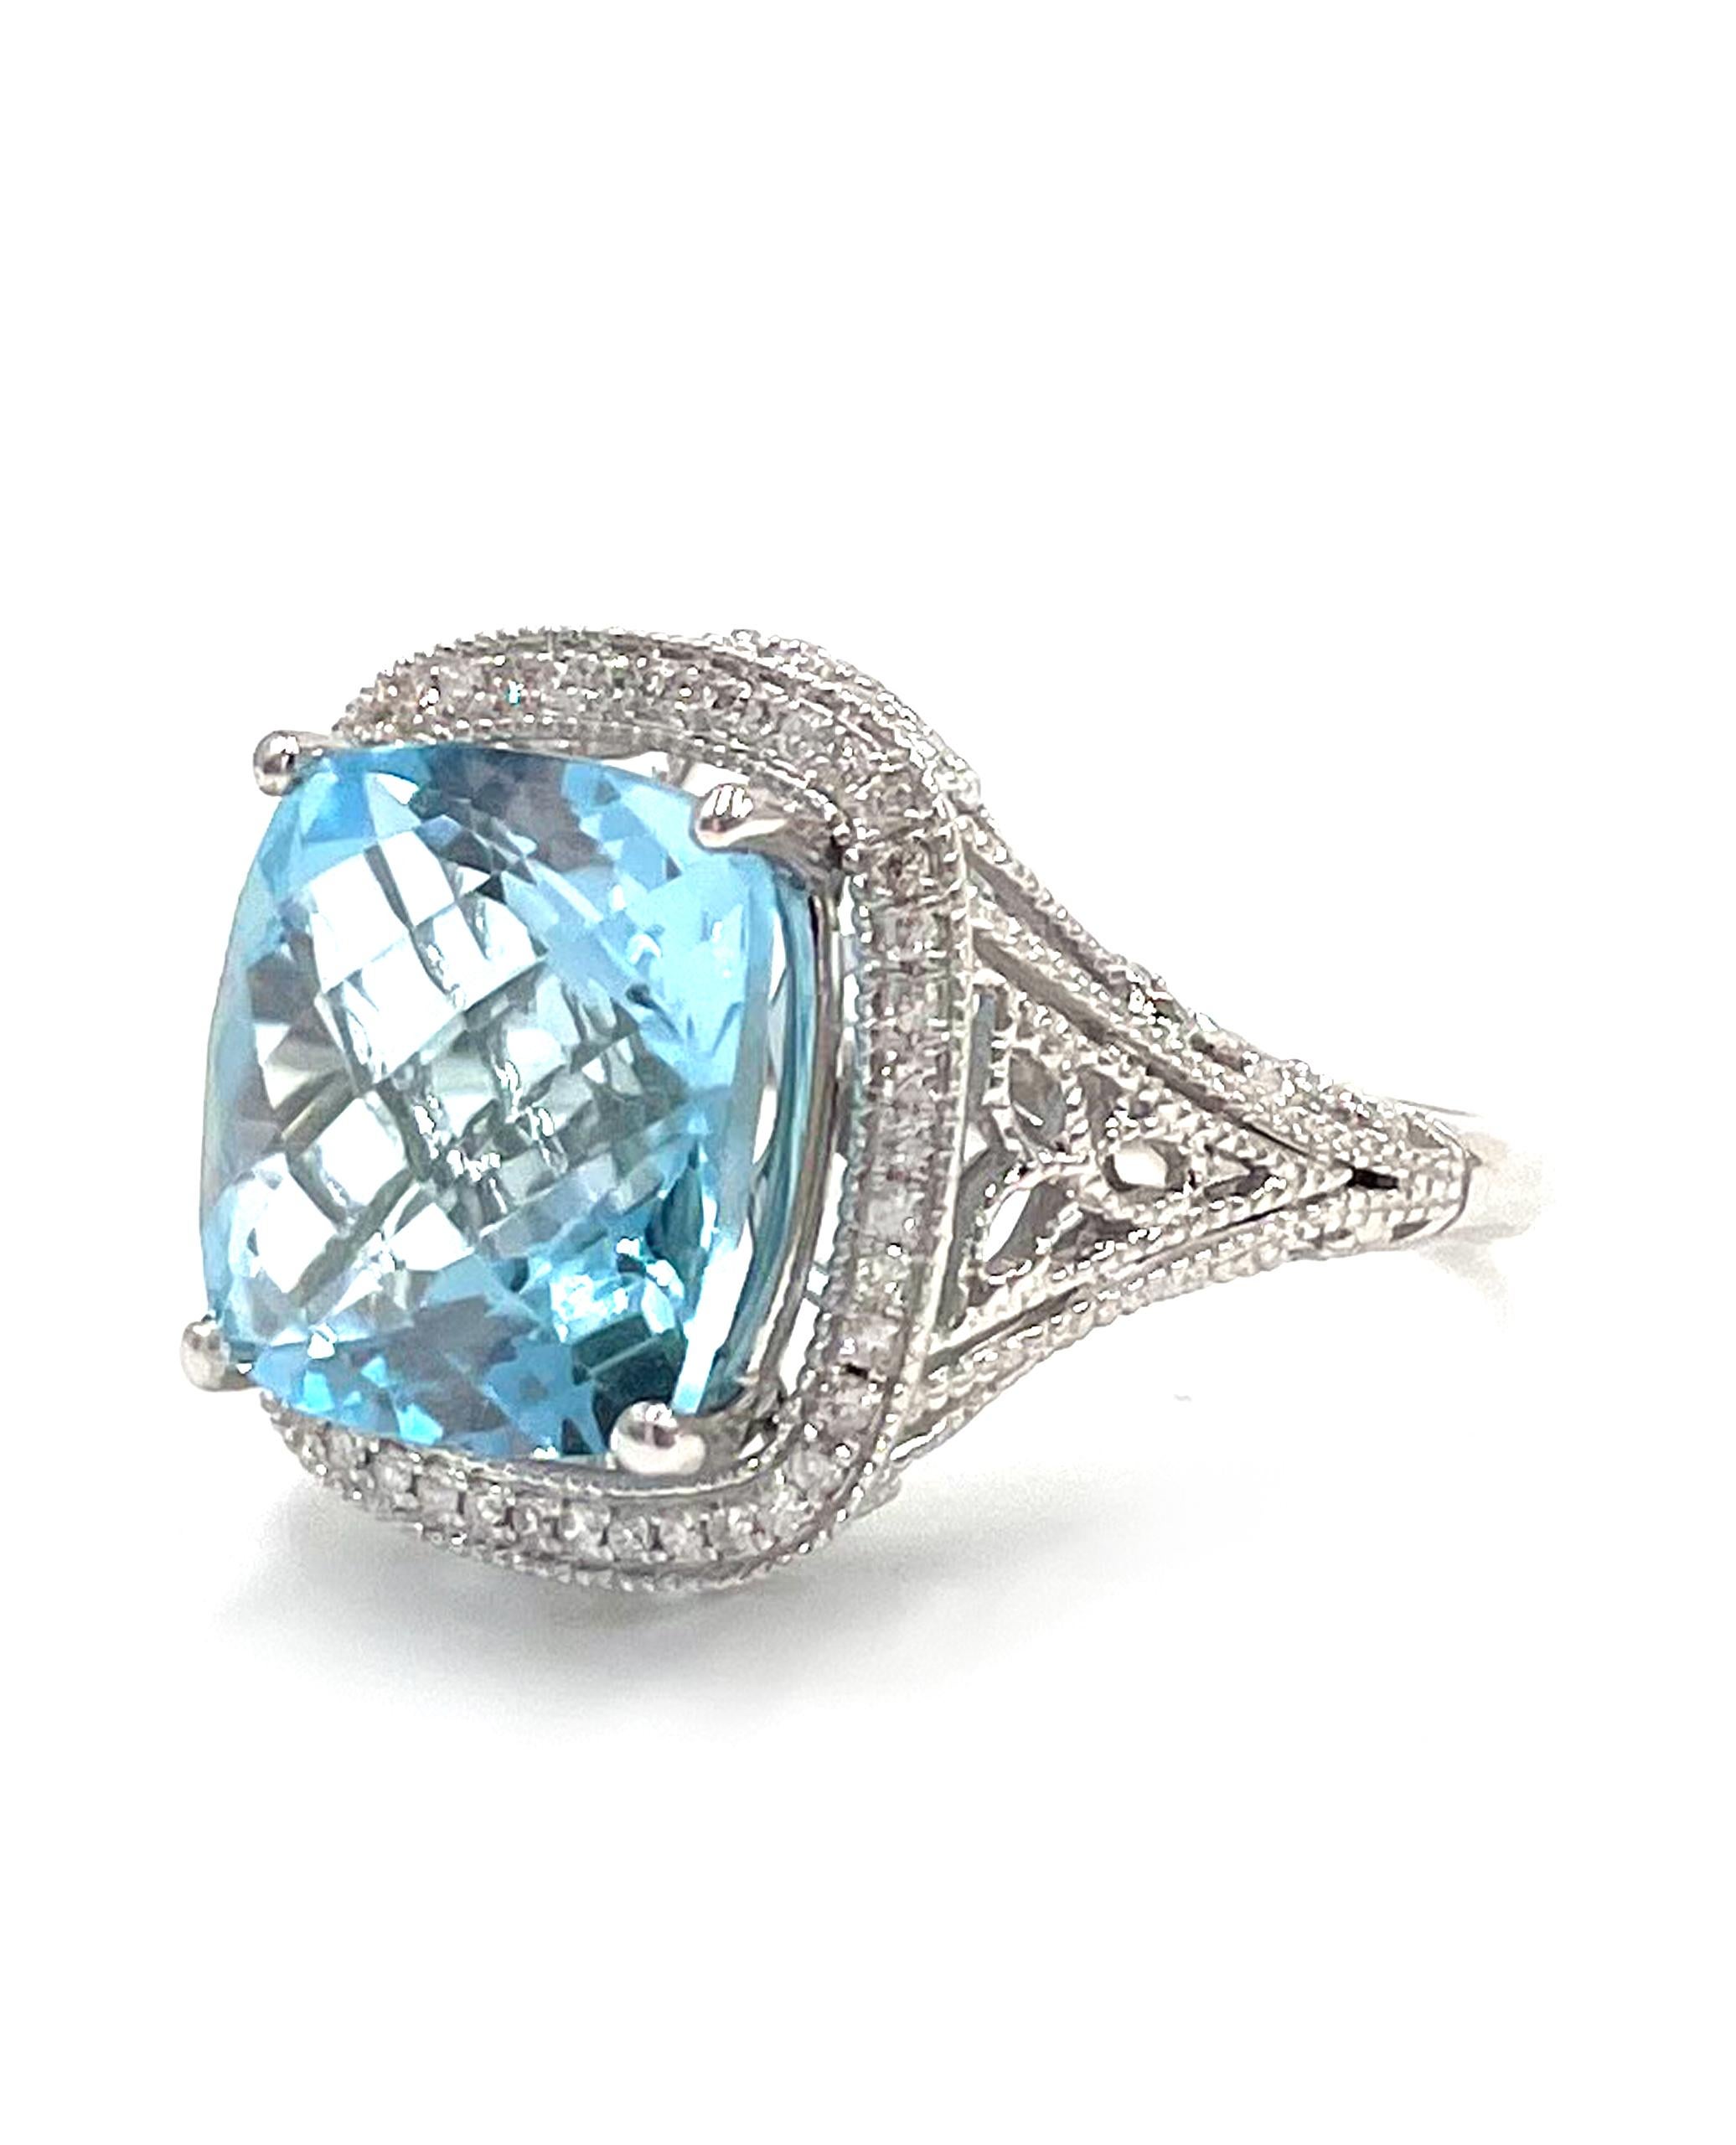 14K white gold ring with modern filigree detail.  The ring is furnished with 43 round brilliant-cut diamonds with a total weight of 0.24 carat. In the center is one chequered cut blue topaz weighing 10.20 carats.

* Diamonds are H/I color, SI